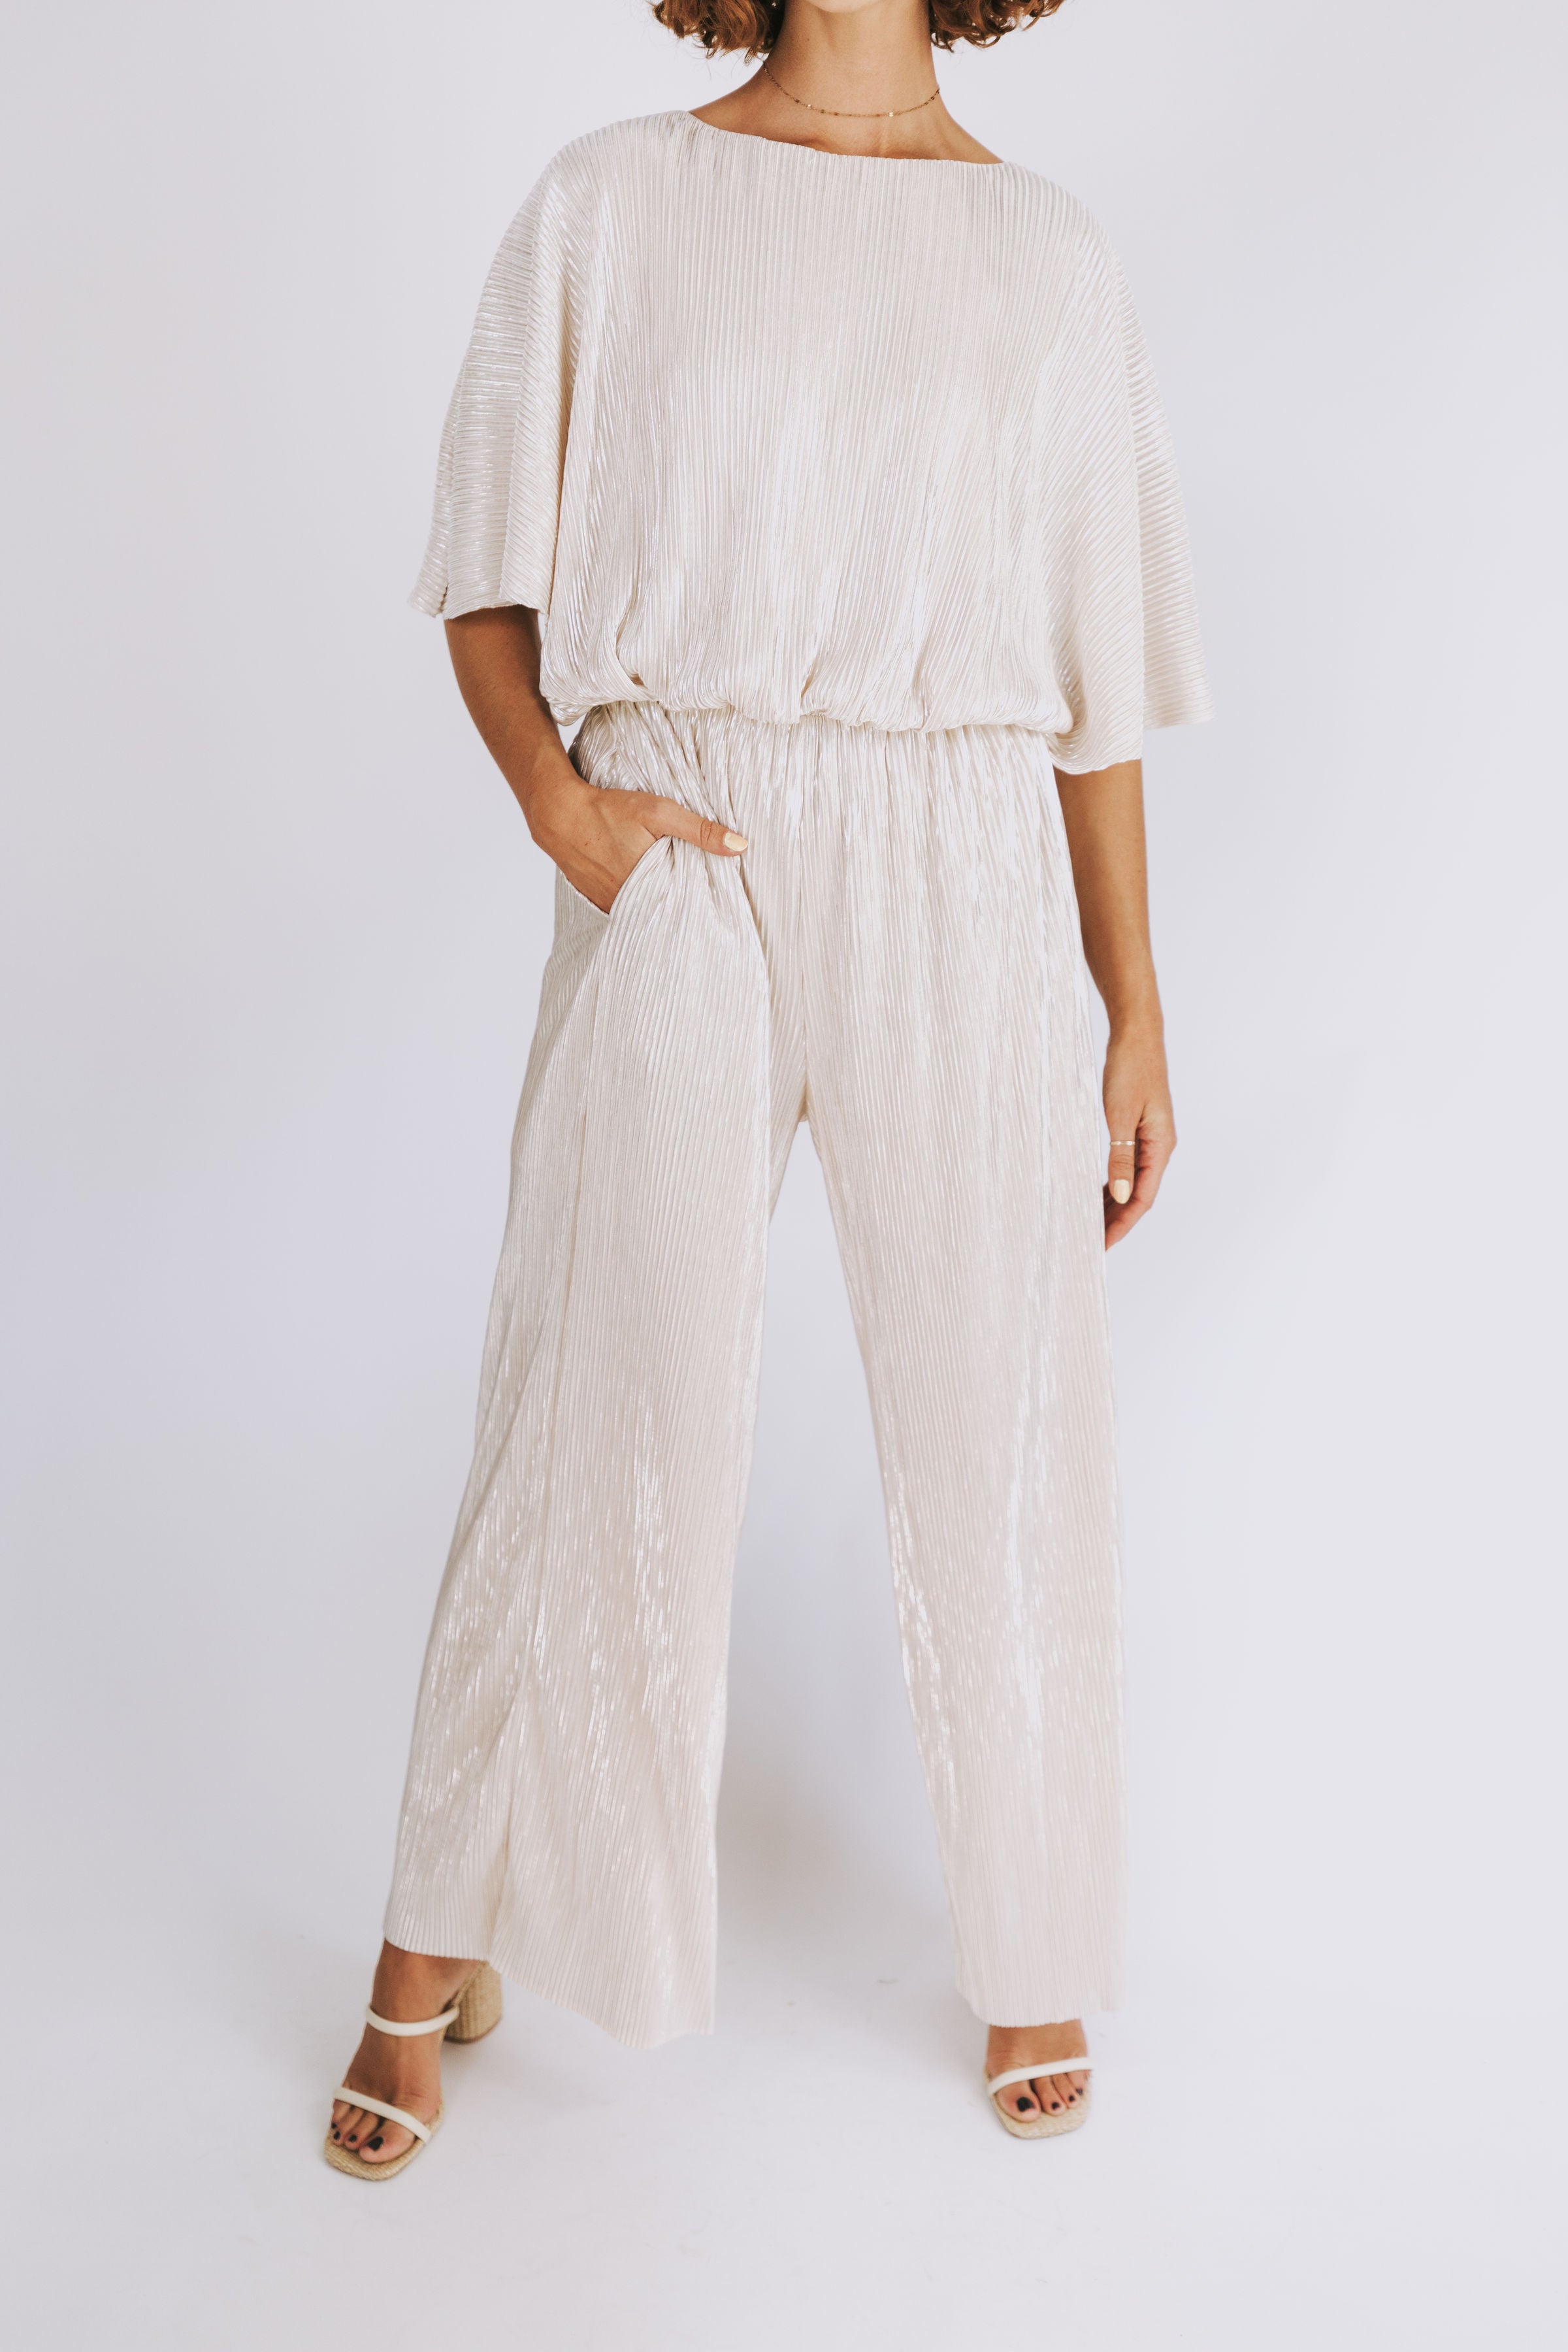 Heavenly Wishes Jumpsuit